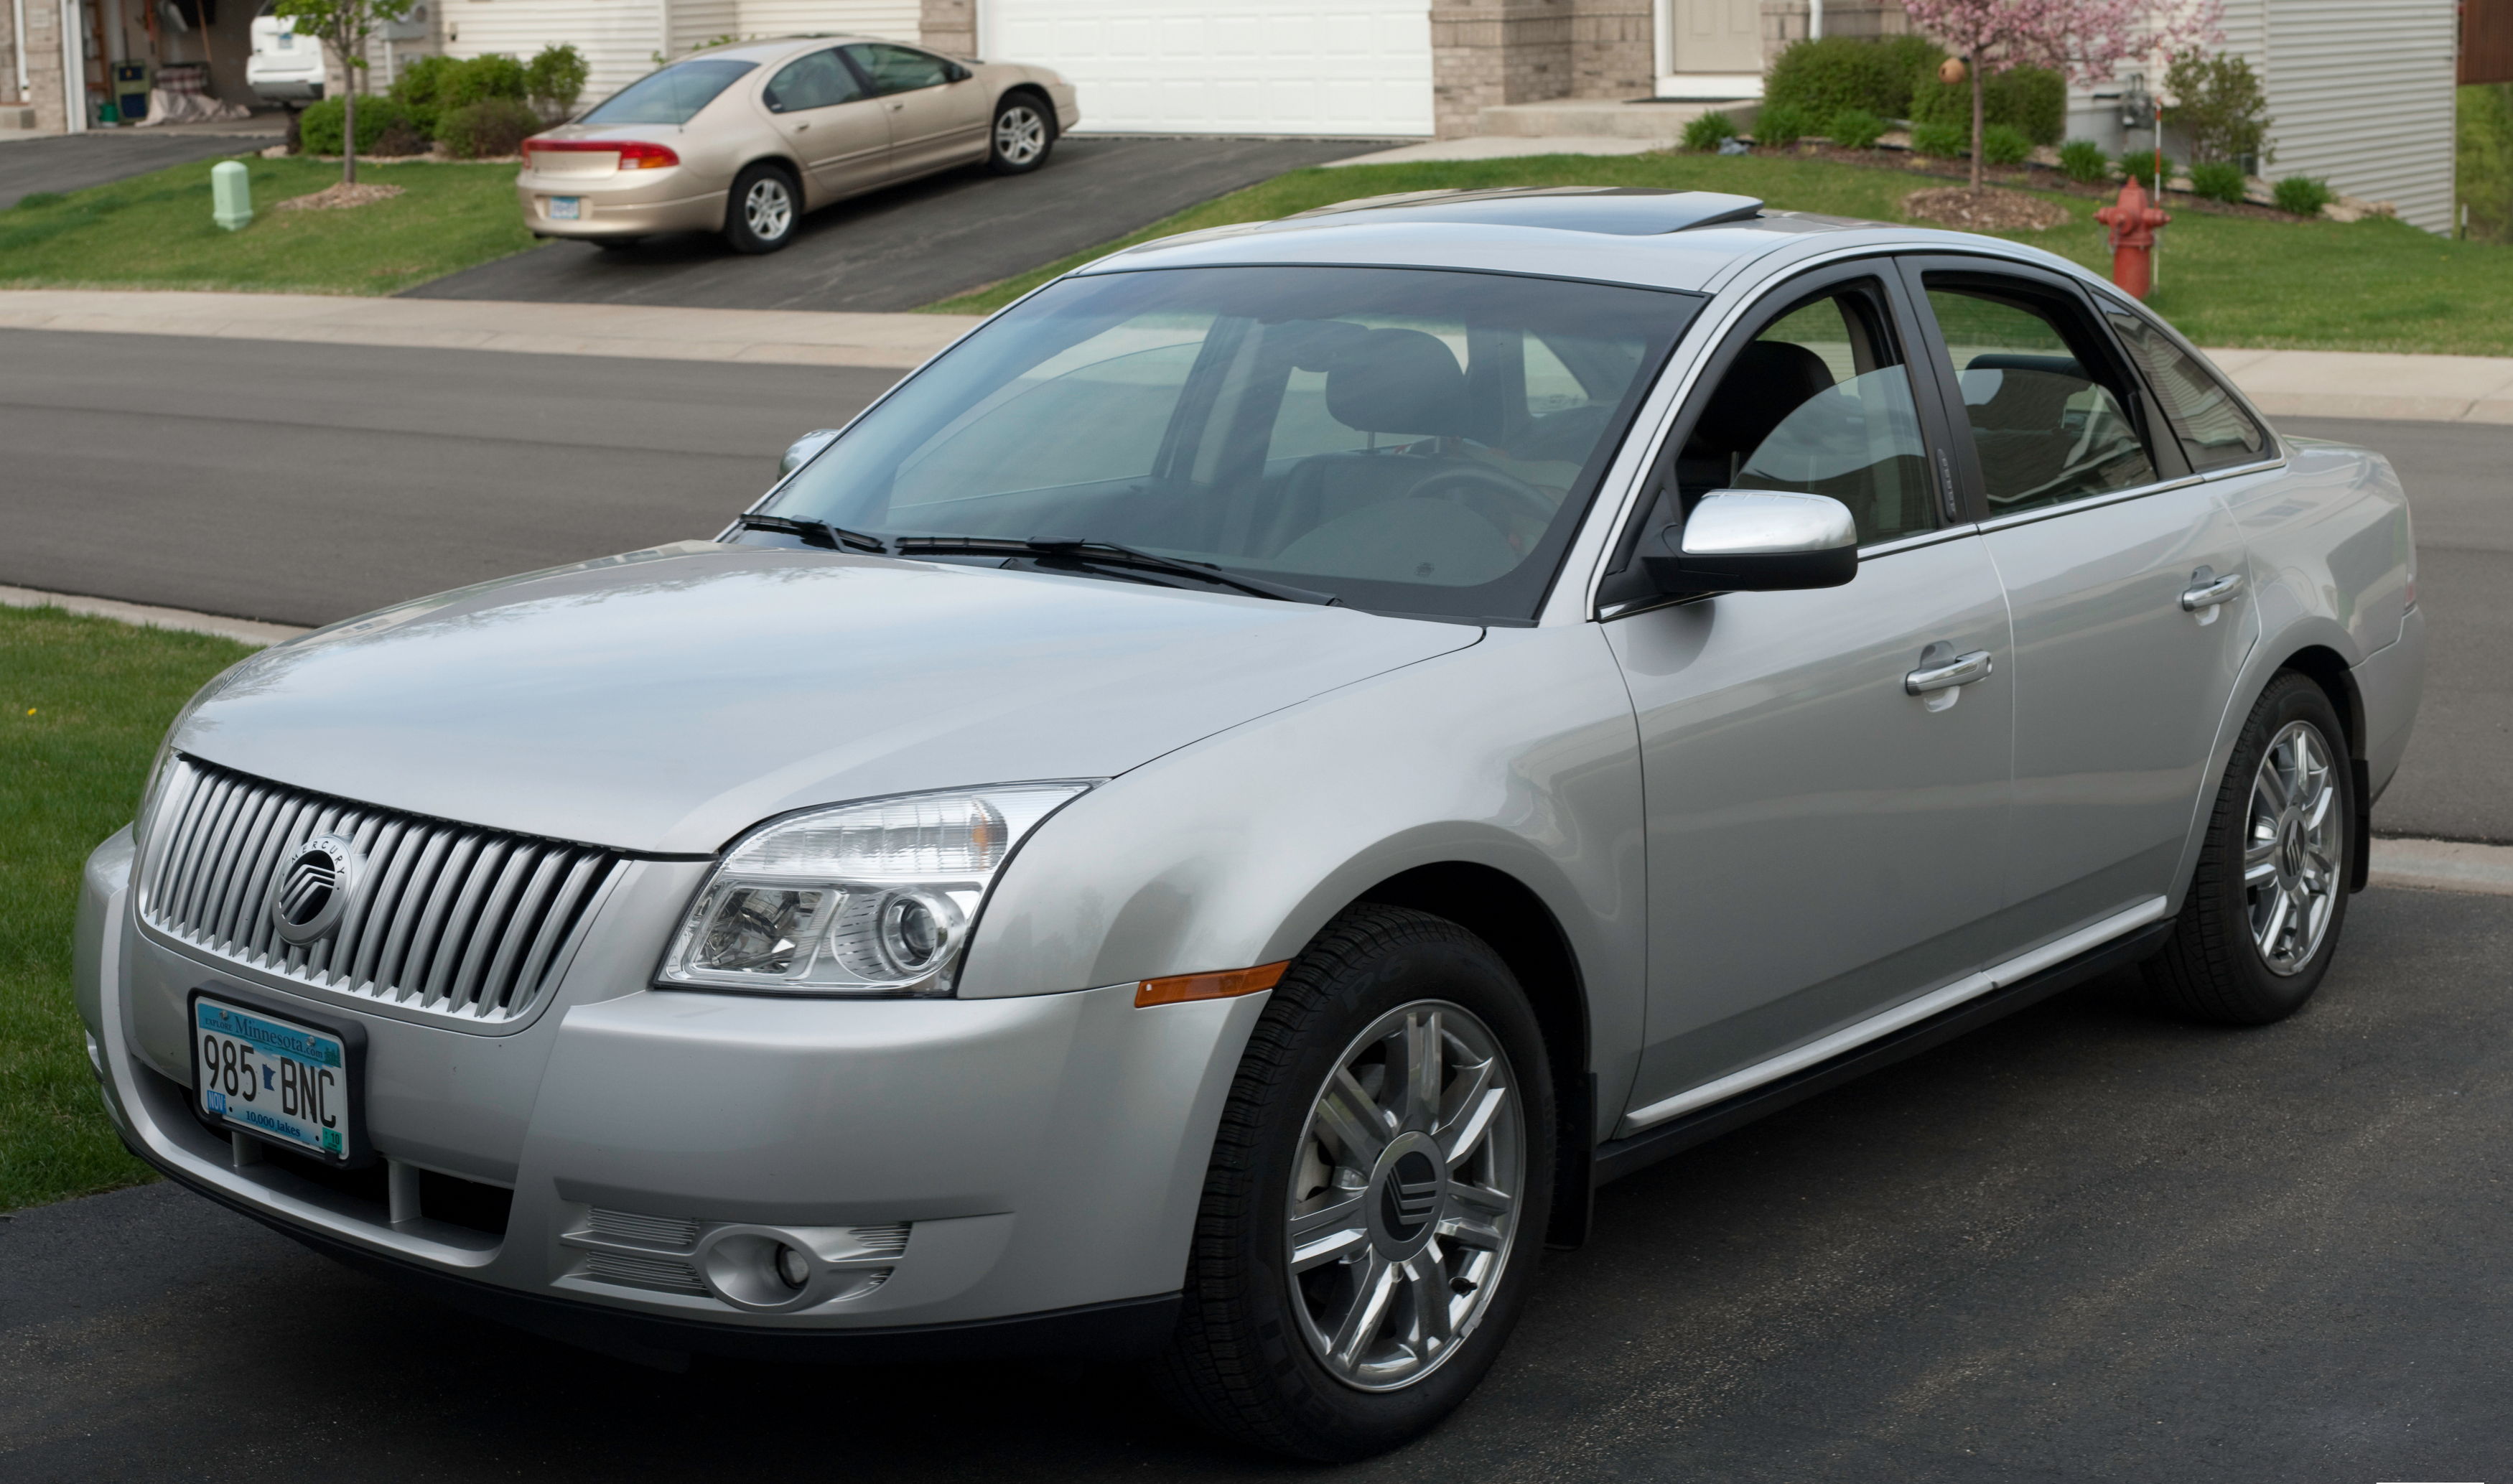 Photos | 2009 Mercury Sable – image auto-stitched from seven handheld photos